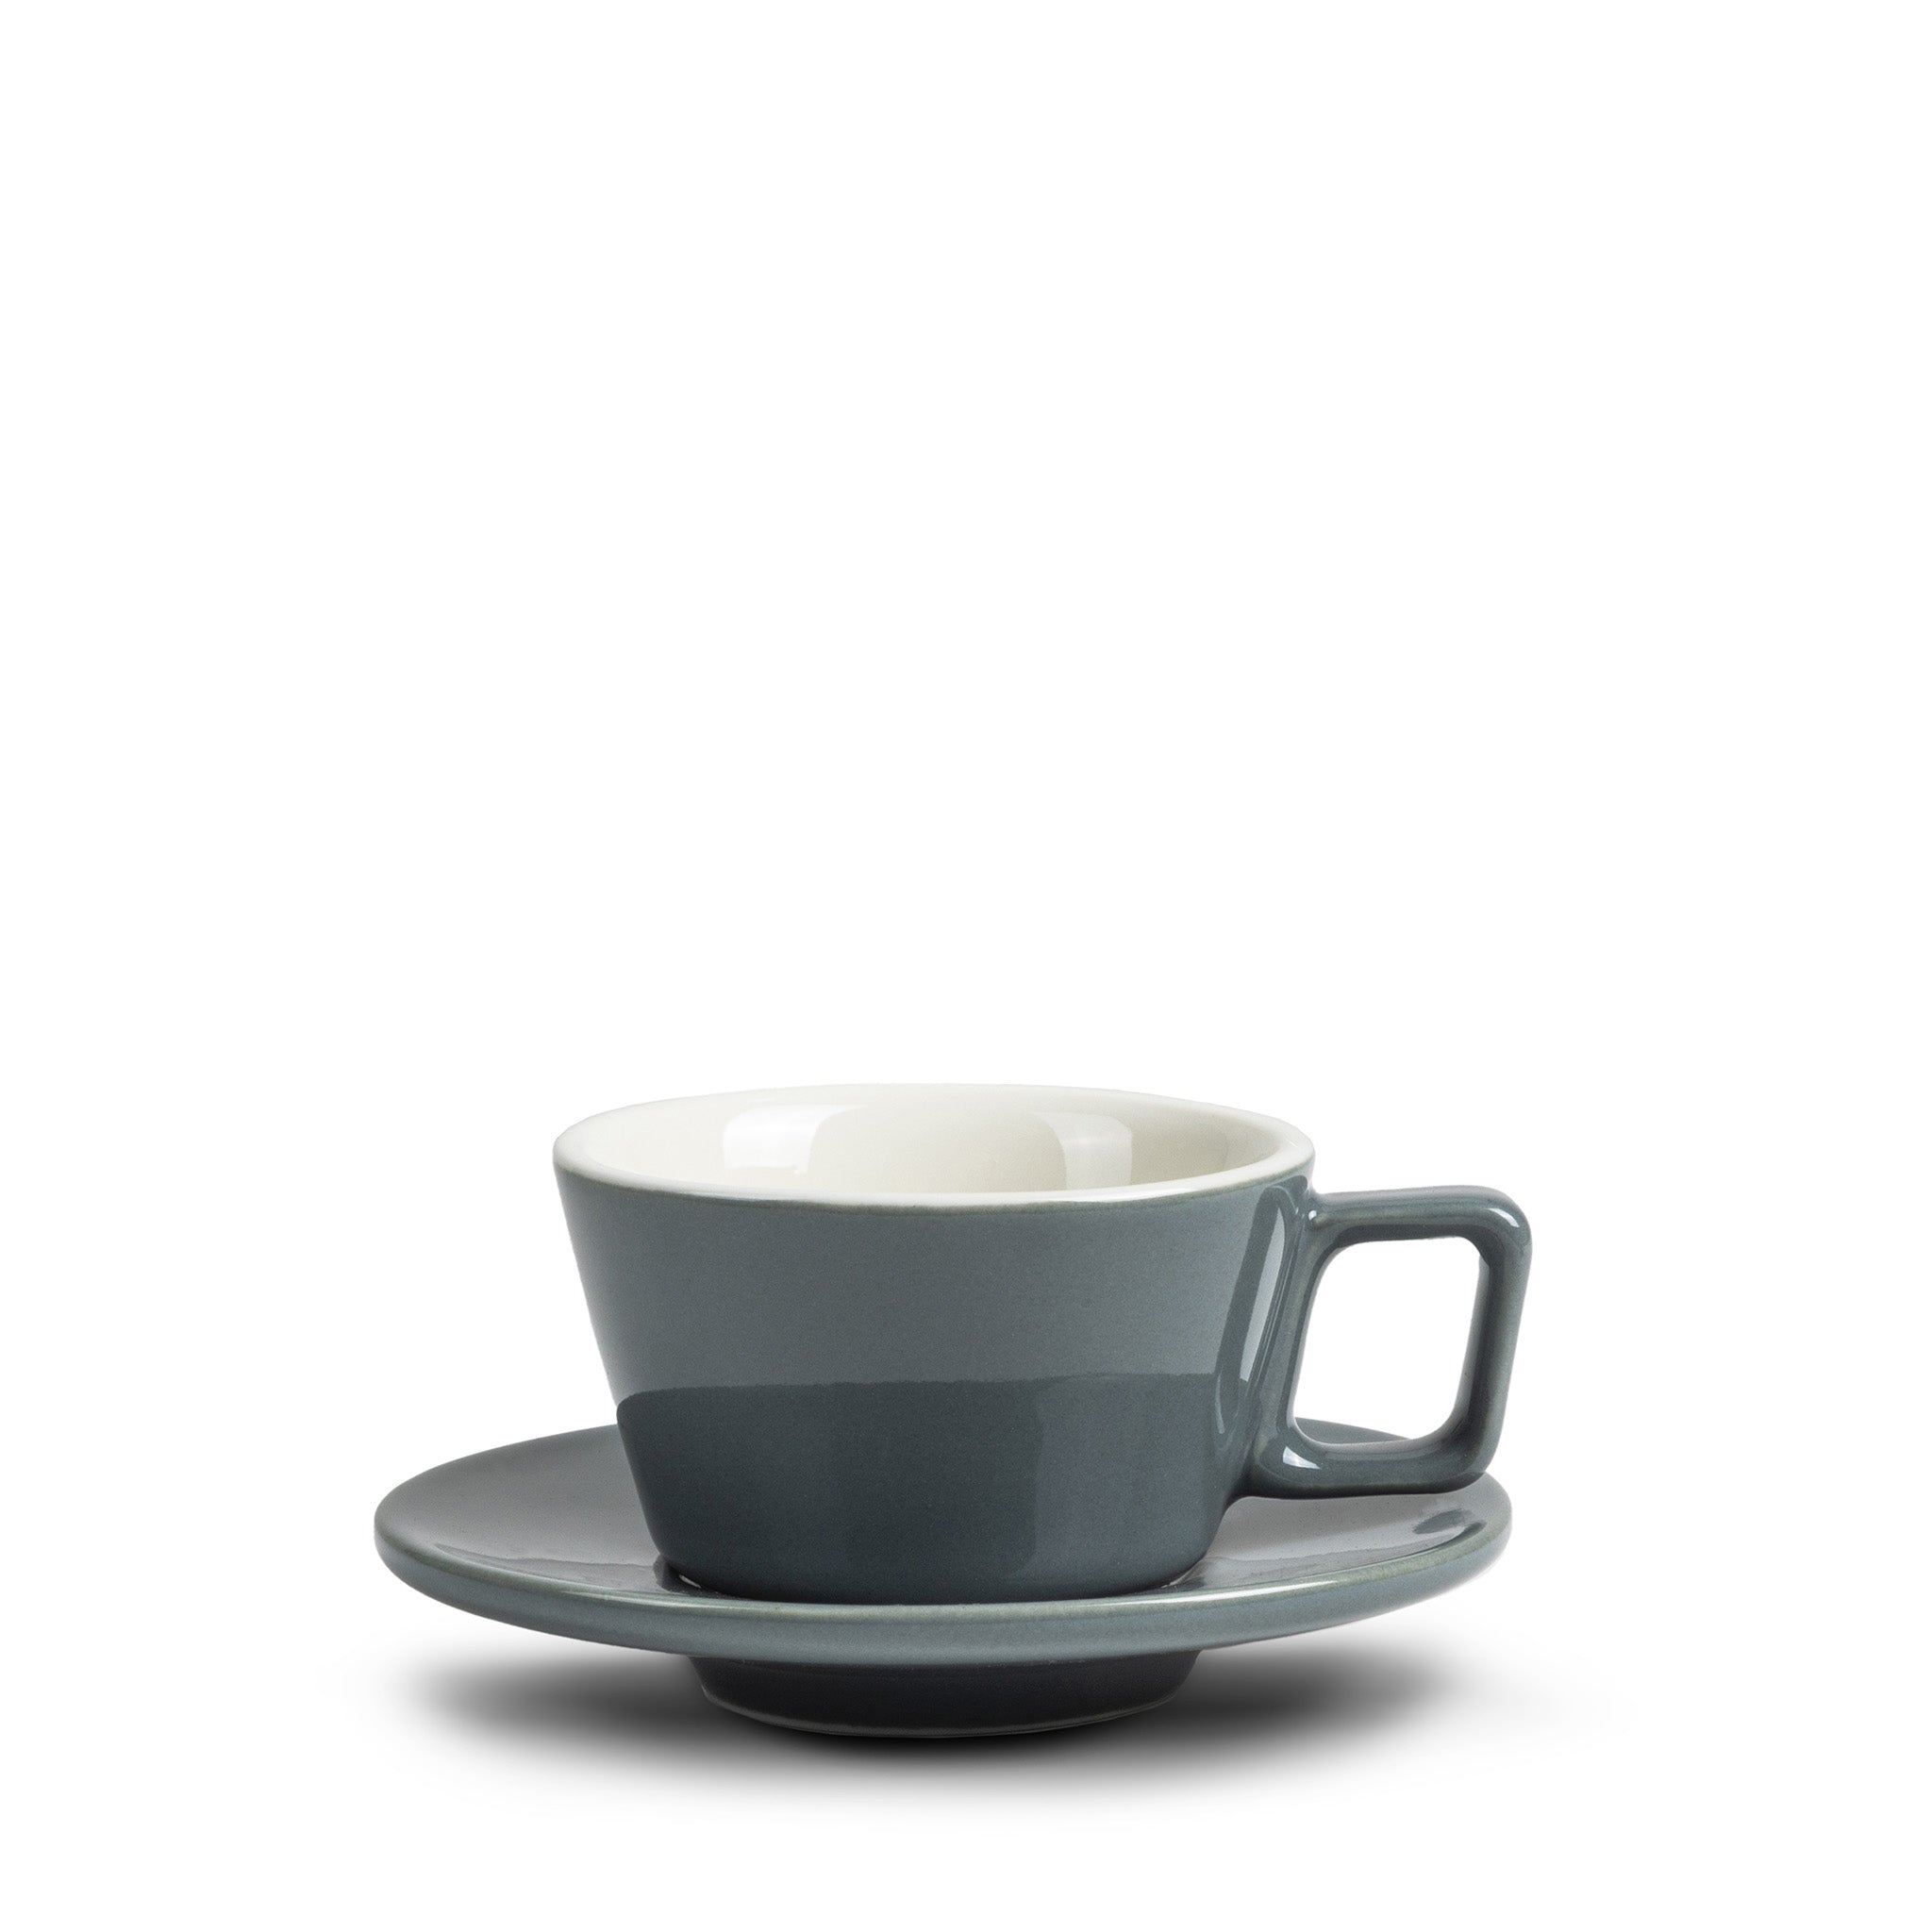 Coffee Studio Espresso Cups and Saucers, 4-pack